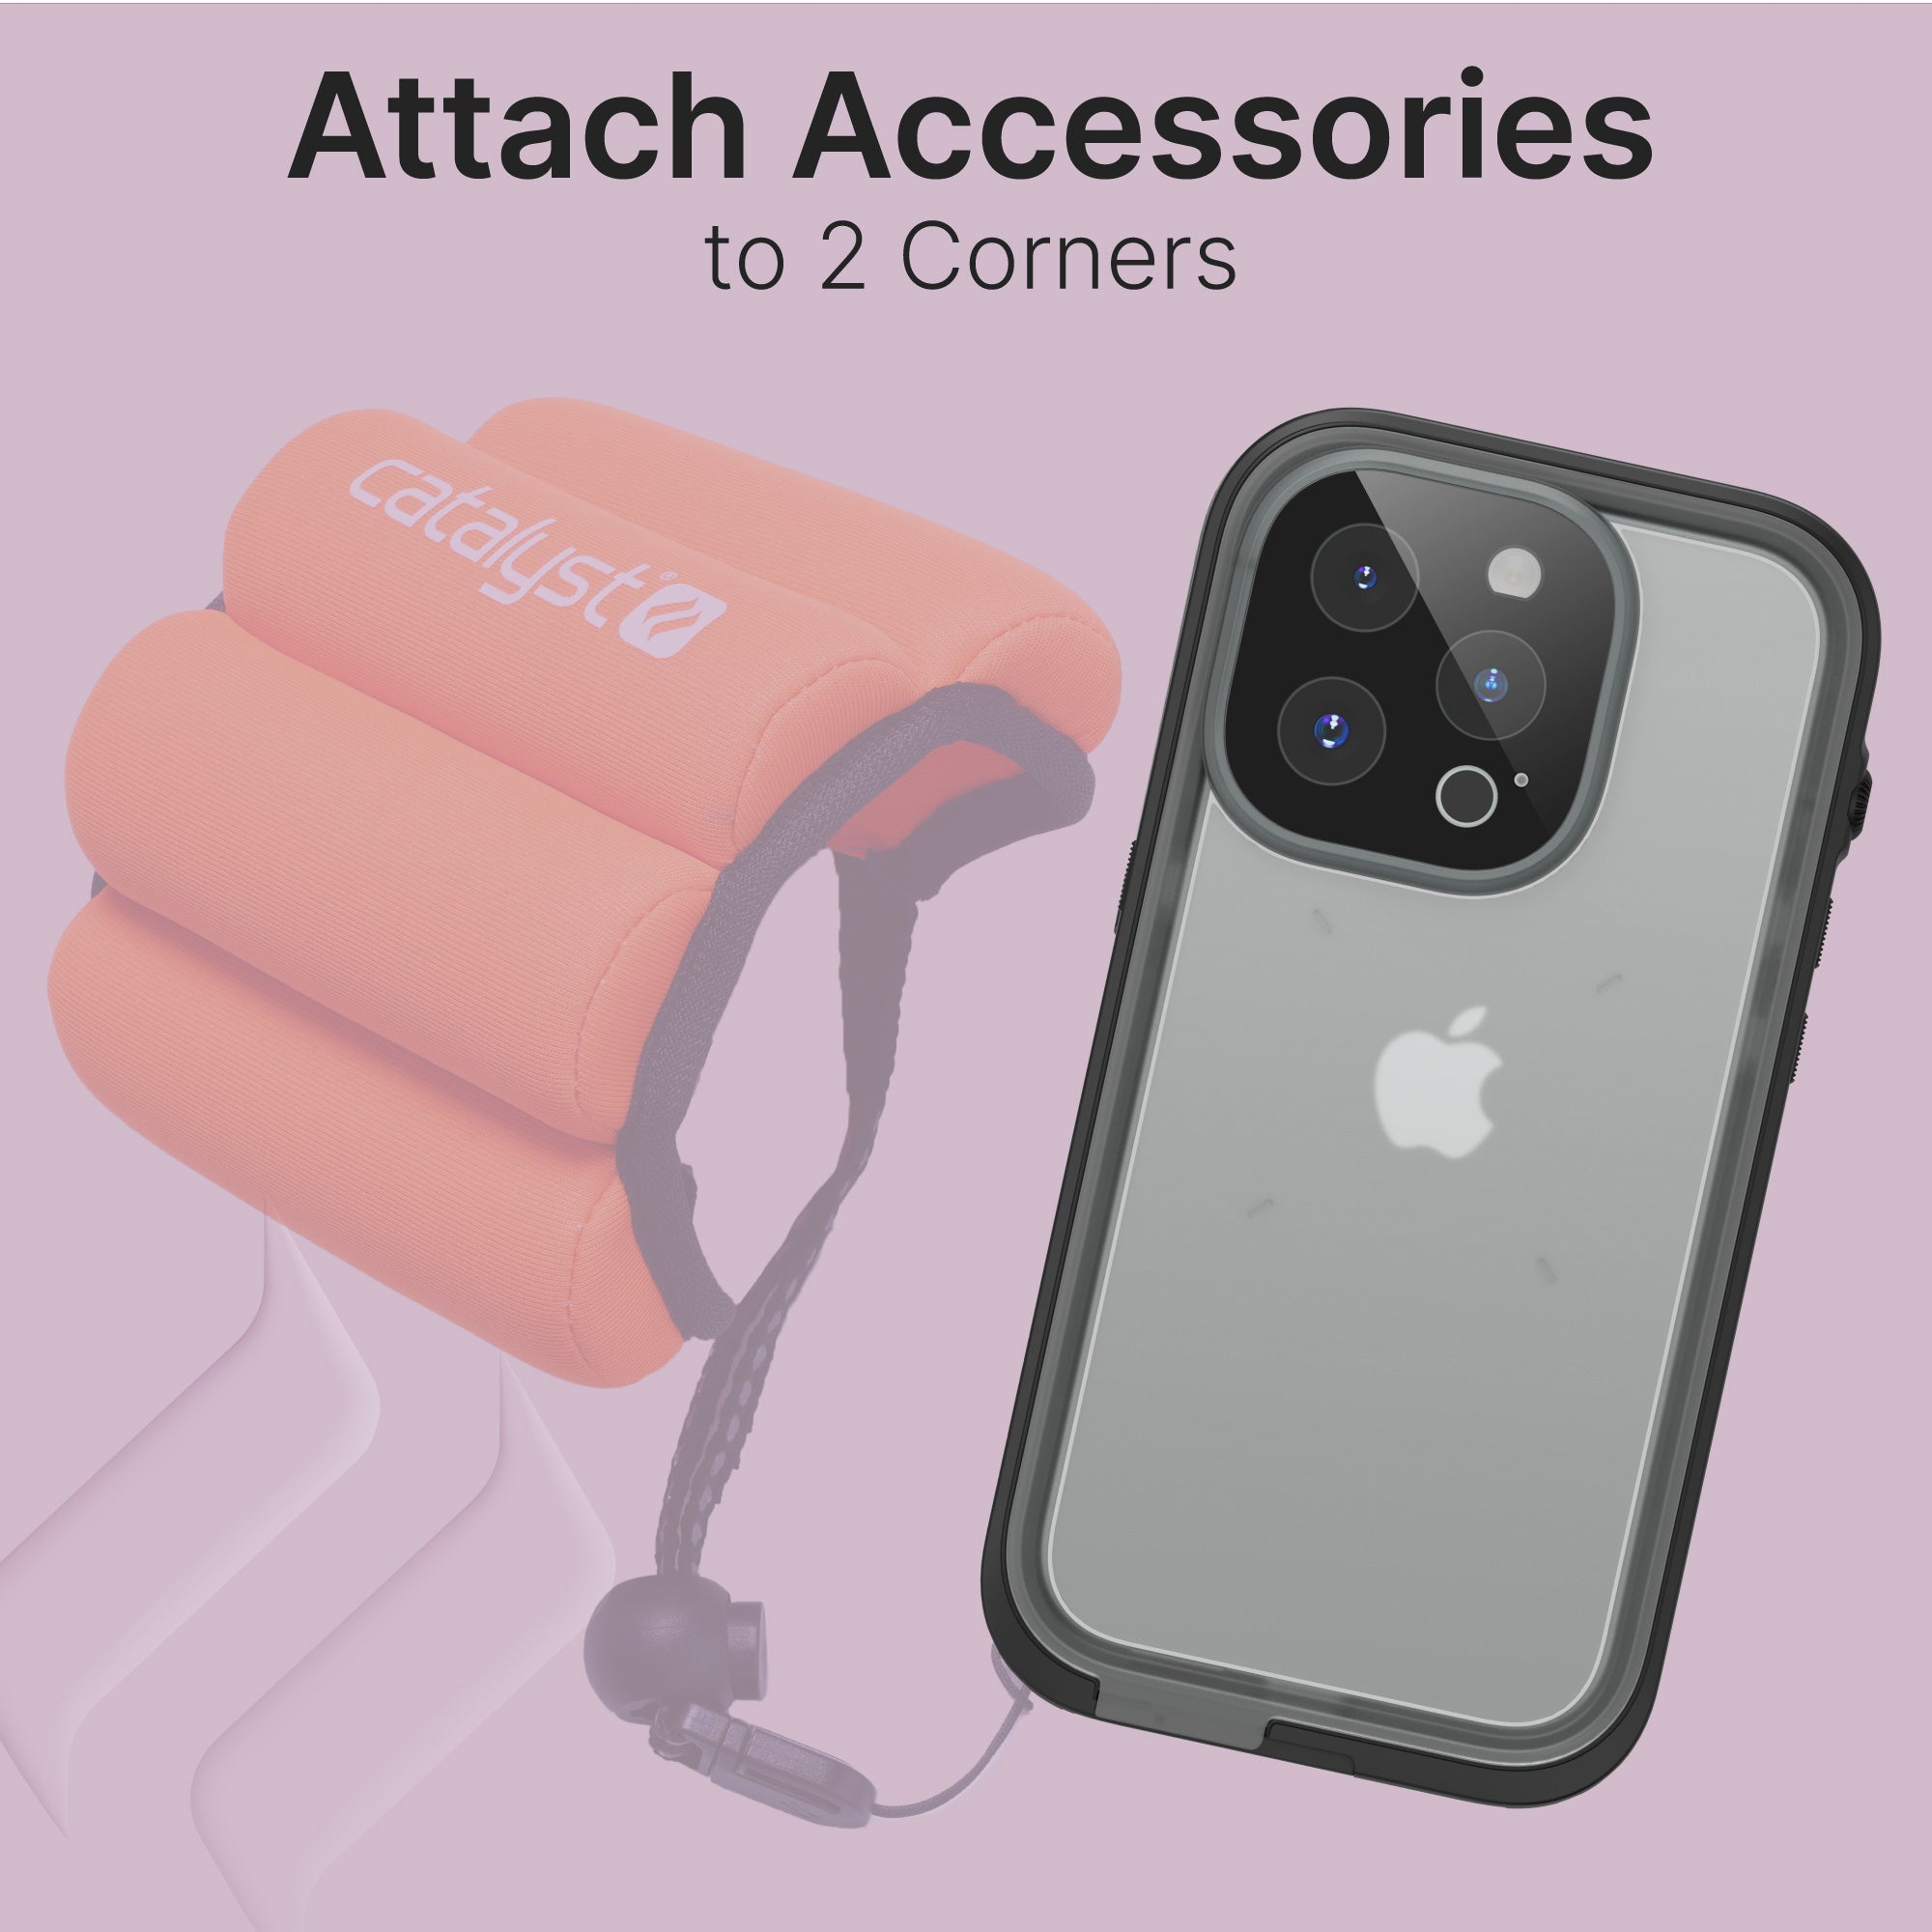 CATIPHO14BLKL-FBA | Catalyst iPhone 14 Plus Waterproof Case Total Protection Floating Wrist Lanyard attached to one of the 2 corners of case